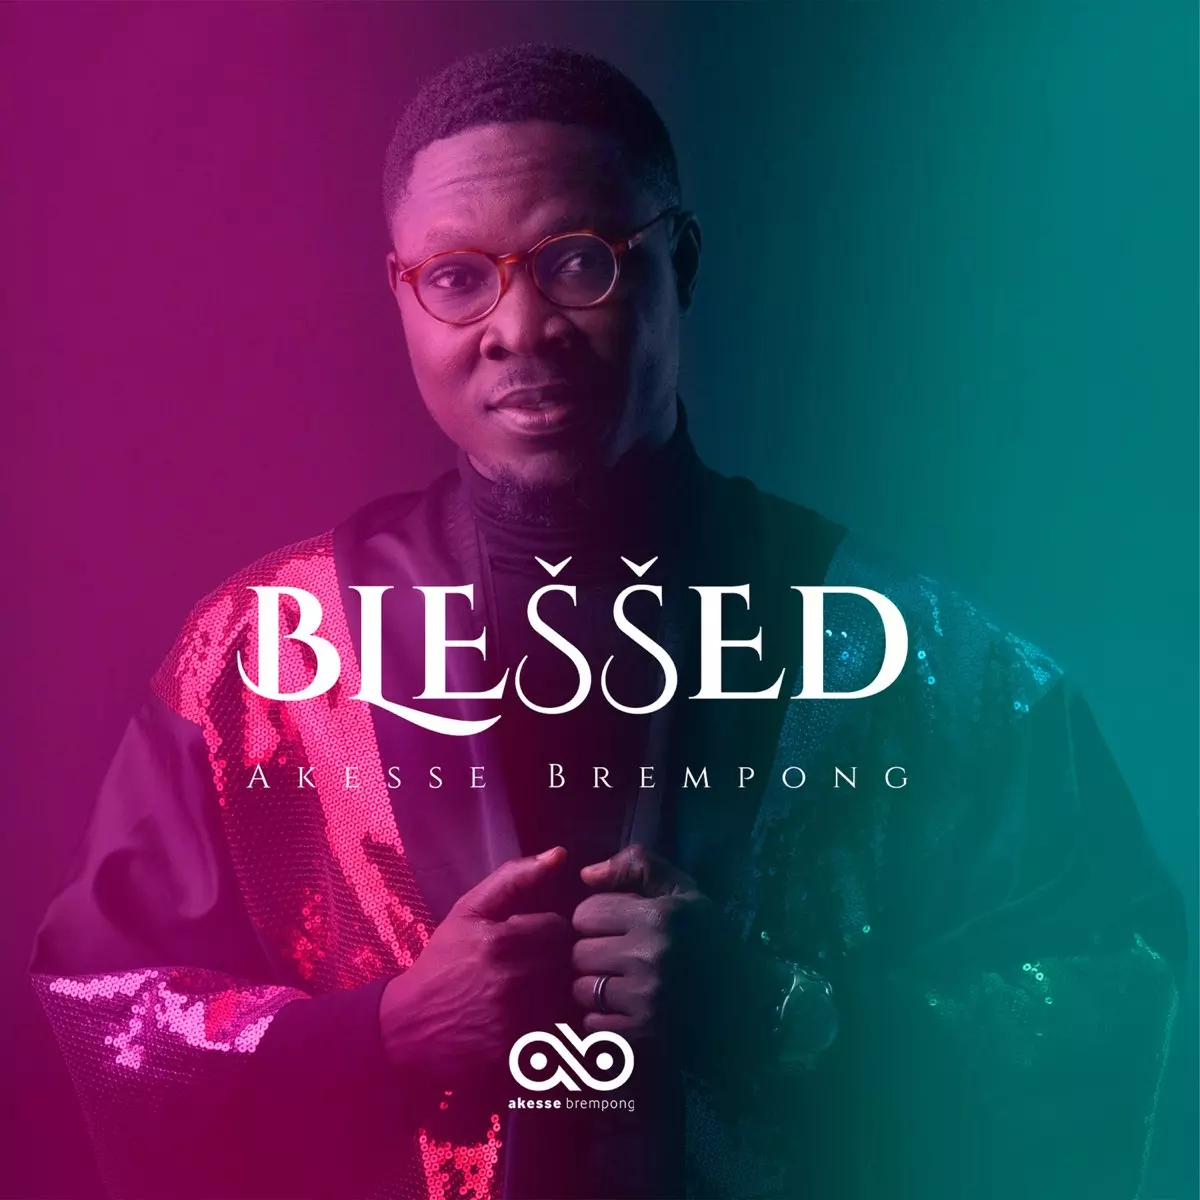 Blessed by Akesse Brempong on Apple Music